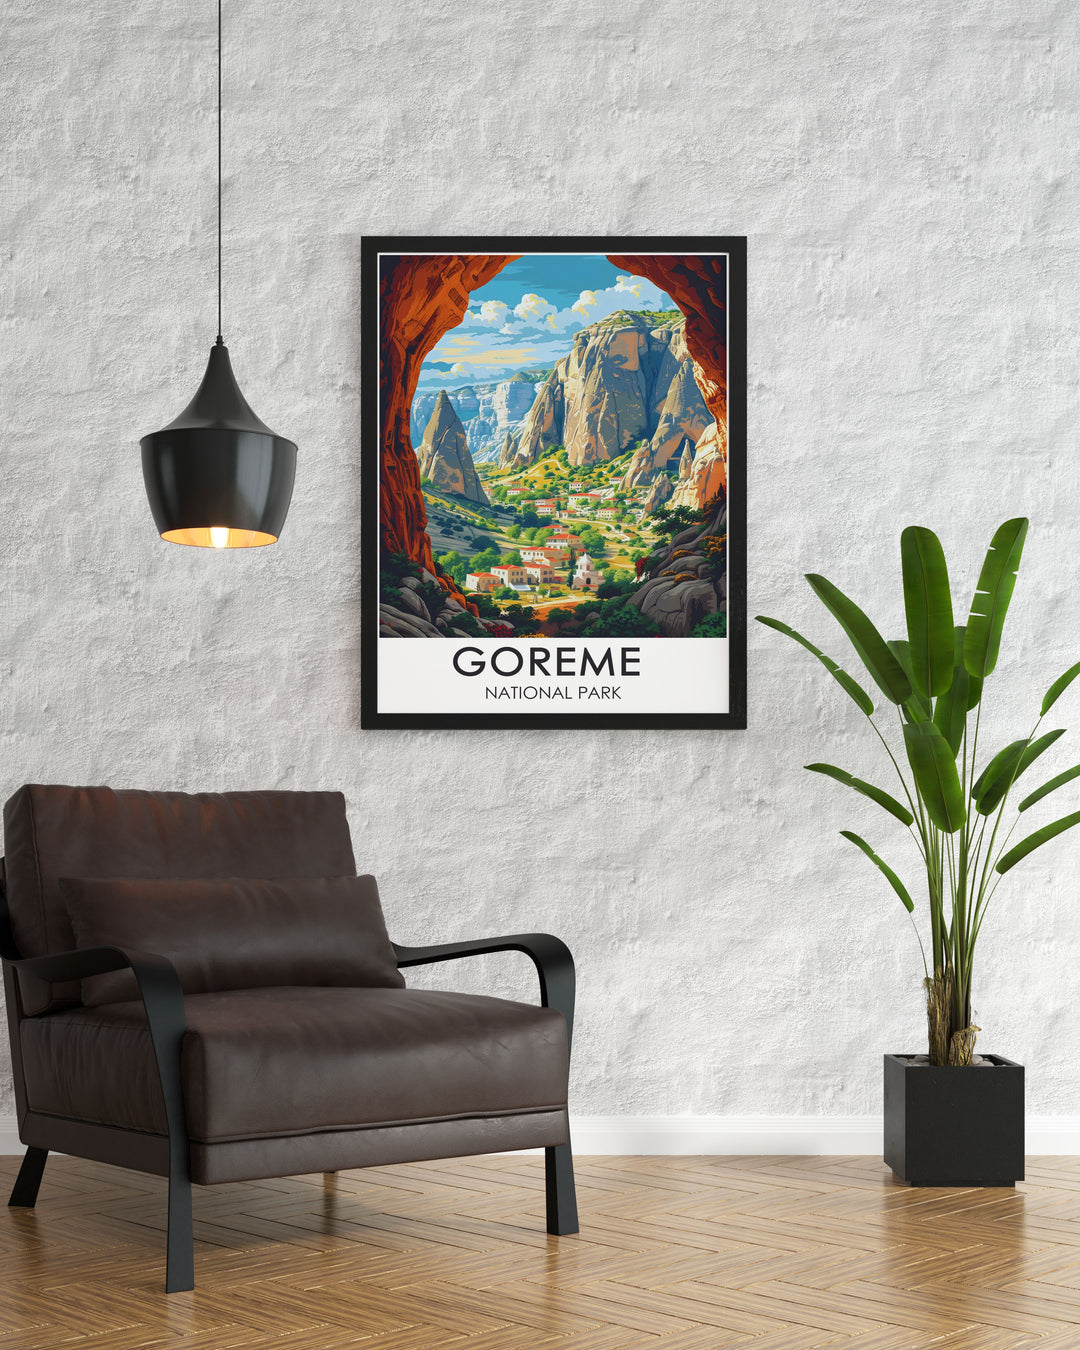 The detailed illustration of Goreme National Parks unique Fairy Chimneys and the Open Air Museum creates a stunning piece of wall art, celebrating the natural and historical wonders of Cappadocia, Turkey, and bringing a sense of exploration to your decor.